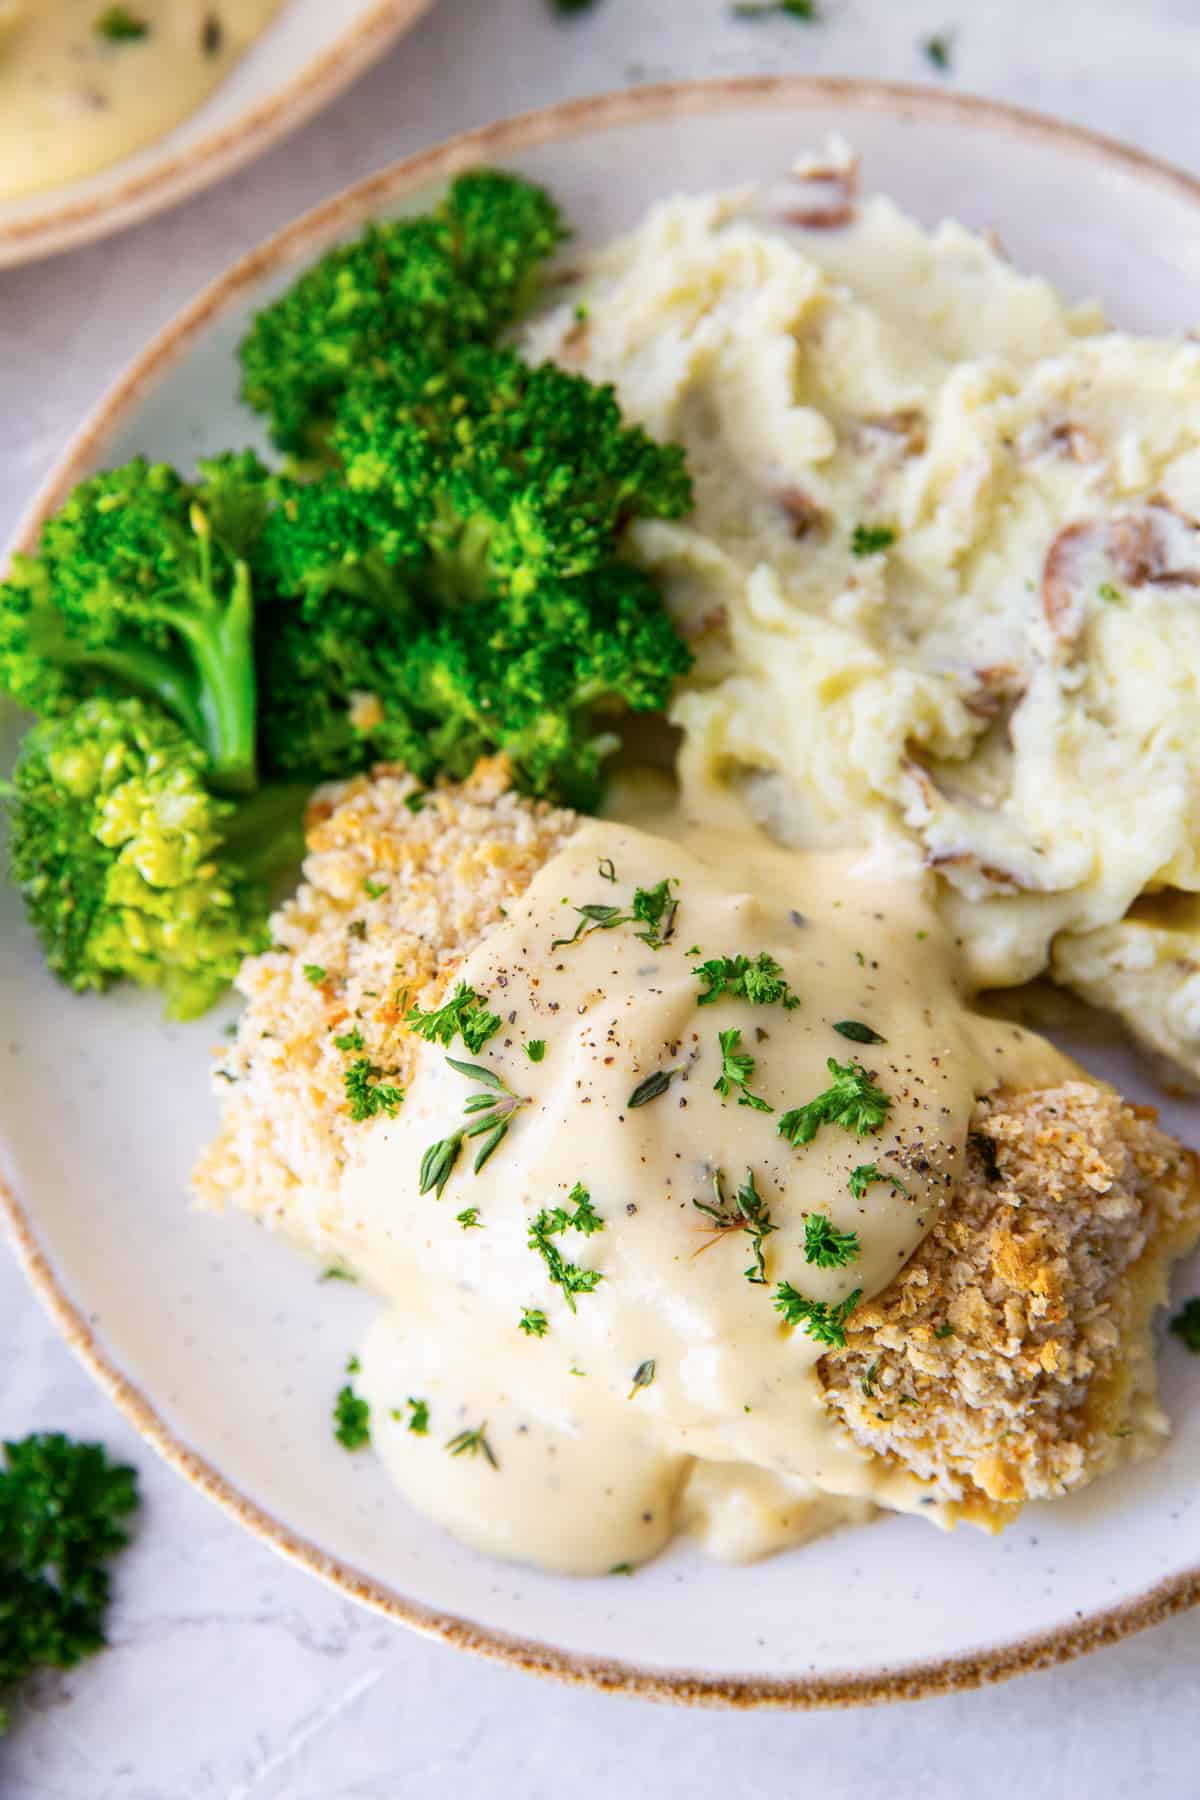 A breaded chicken roll topped with creamy sauce on a white plate with broccoli and mashed potatoes.